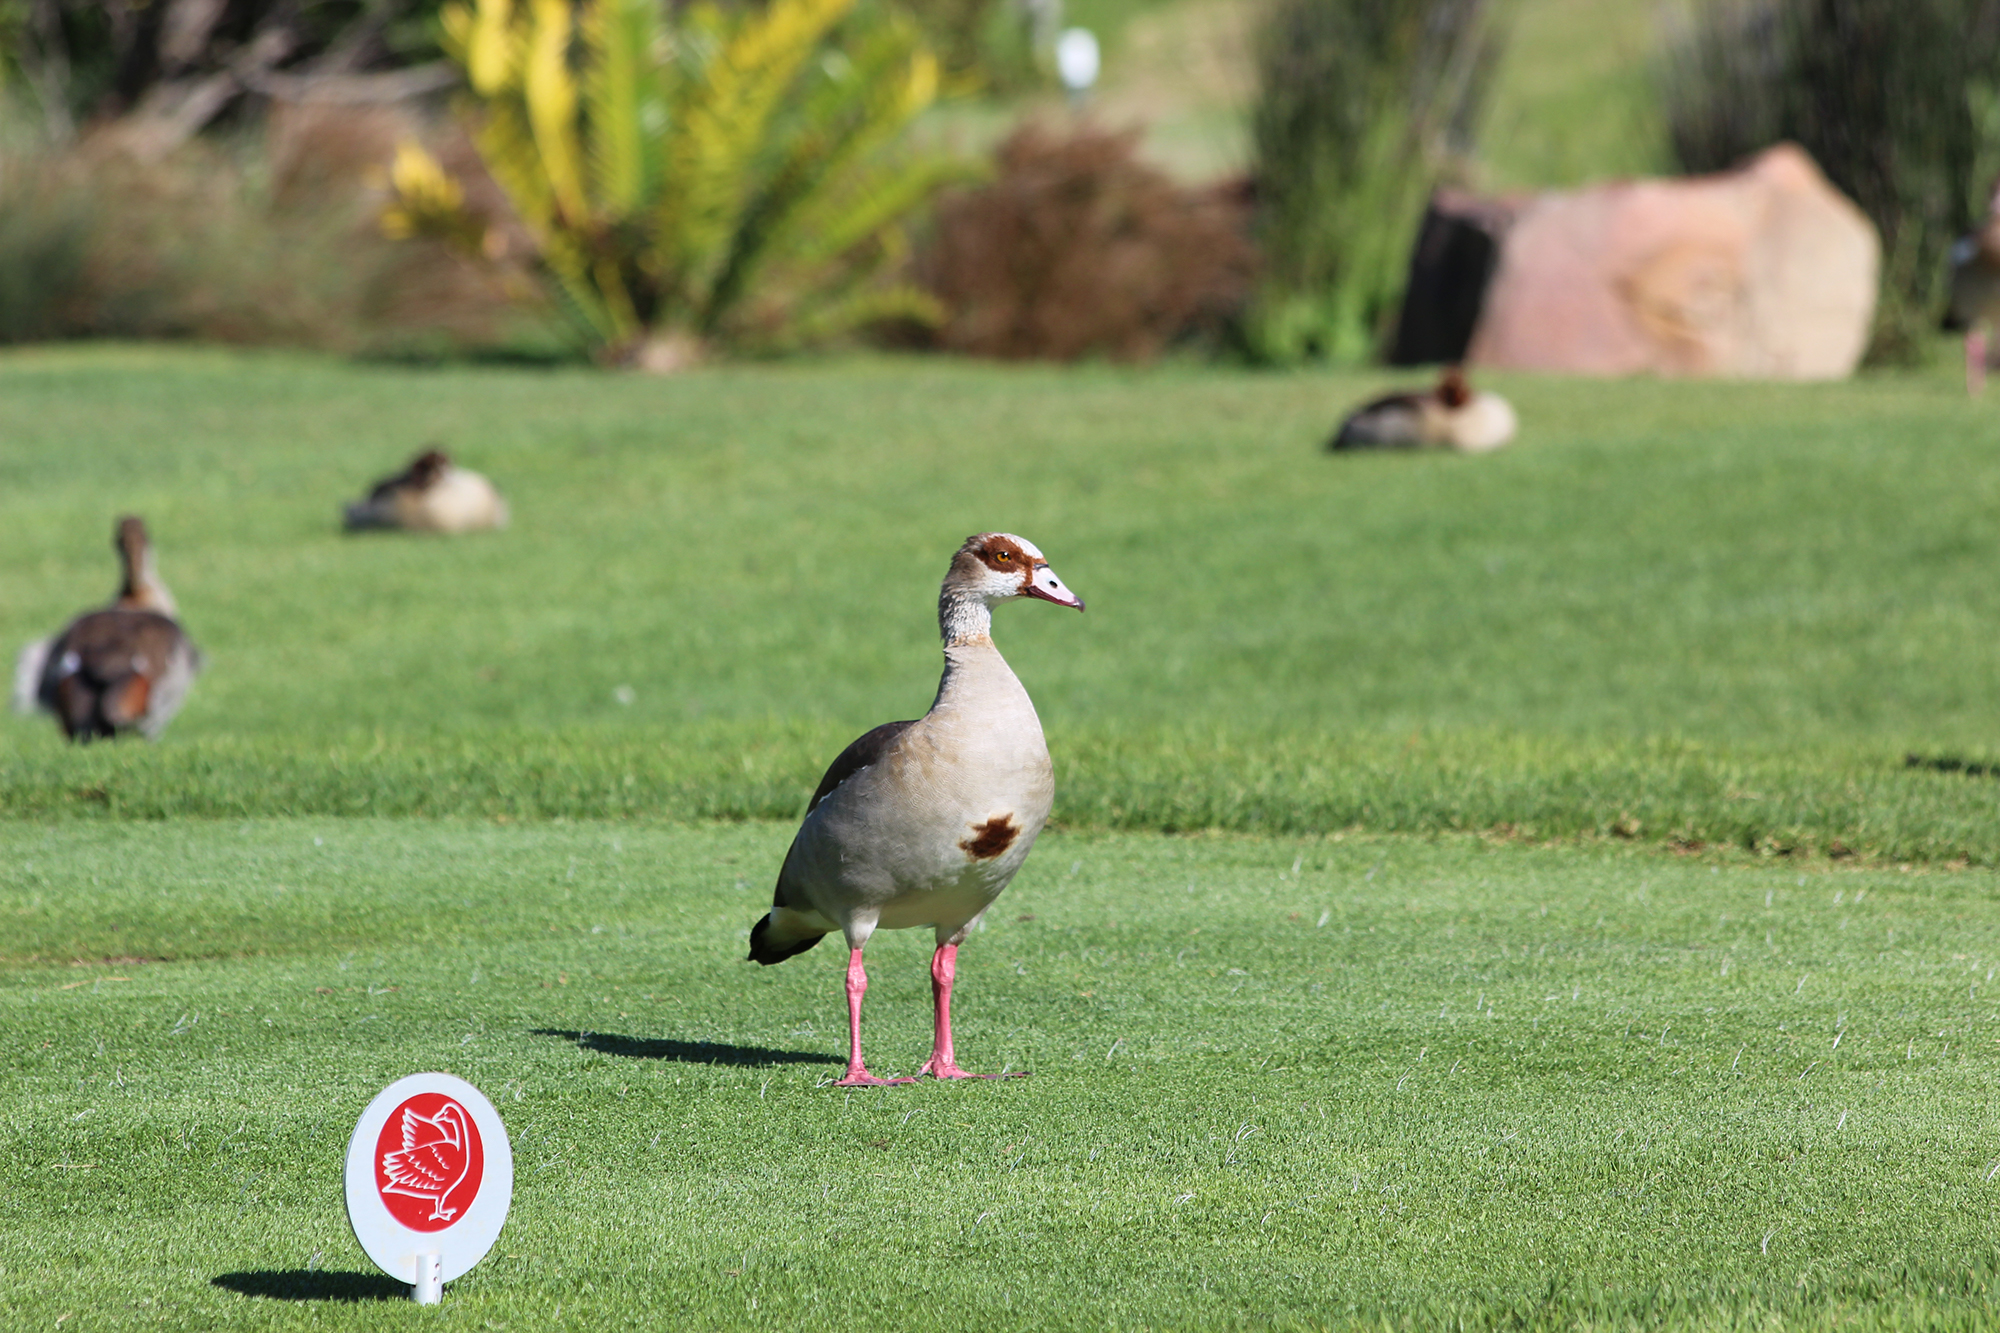 Goosing around on golf courses - University of Cape Town News